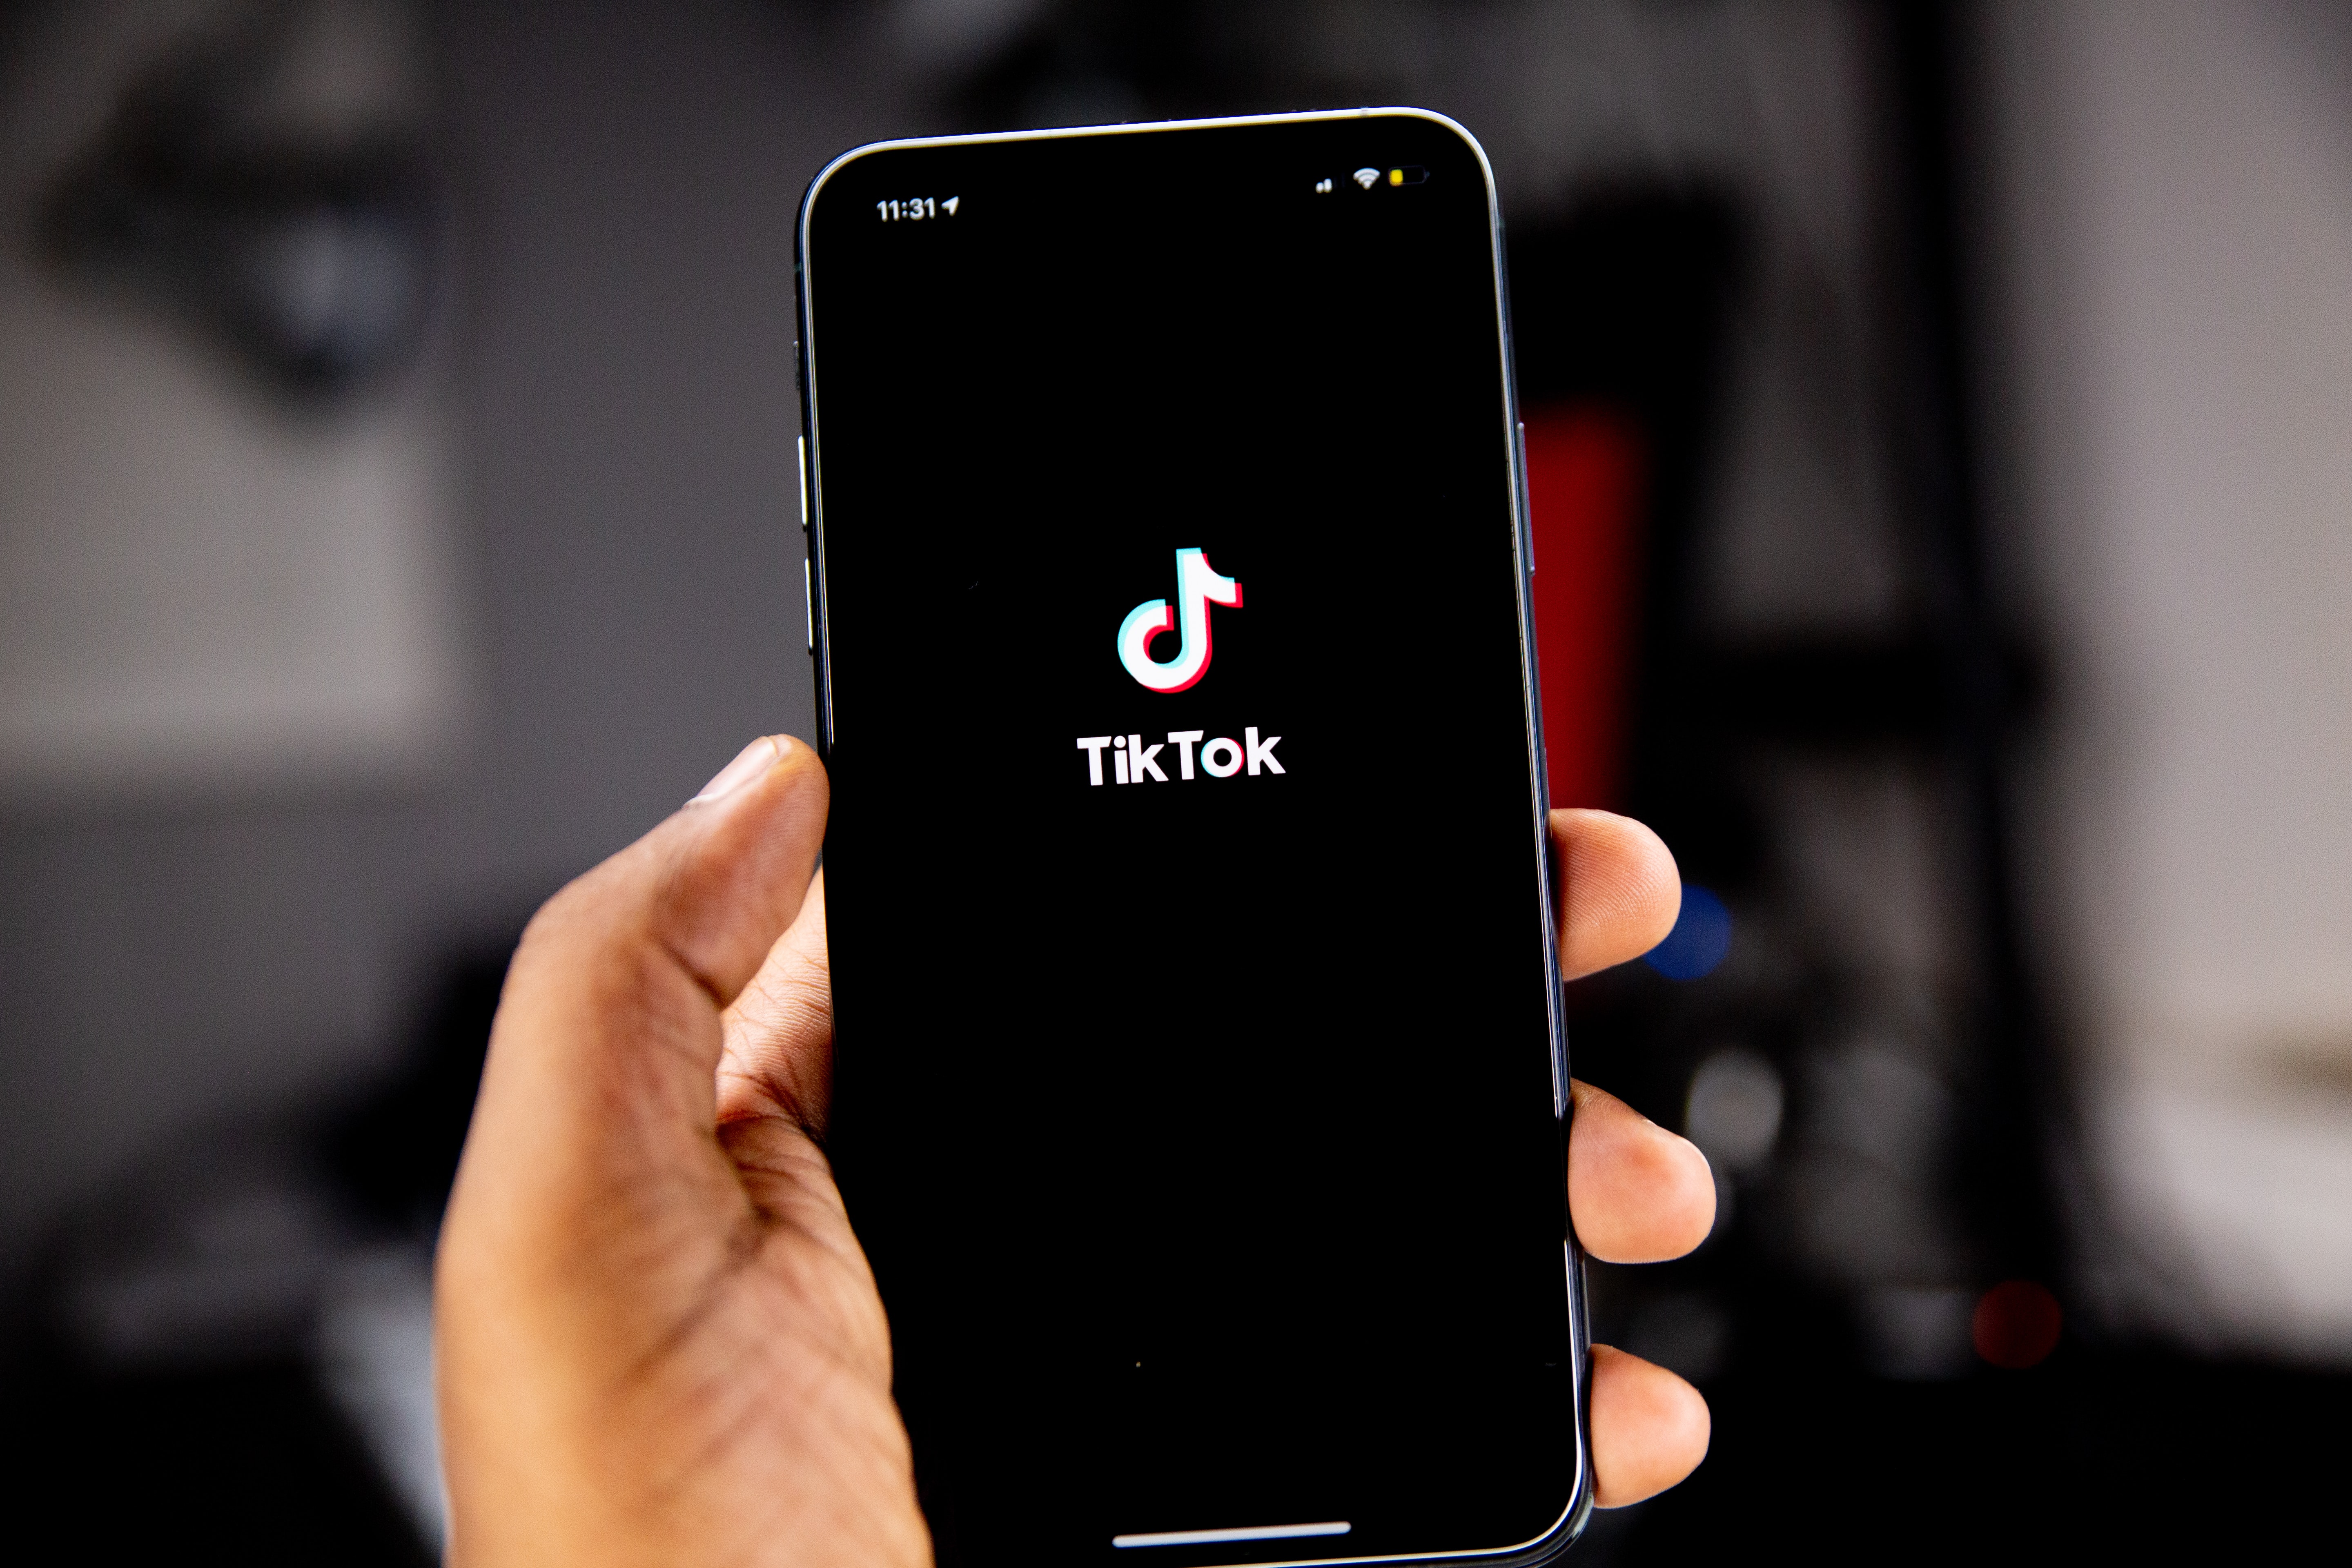 Photograph of a hand holding a phone with the TikTok logo on a black screen background